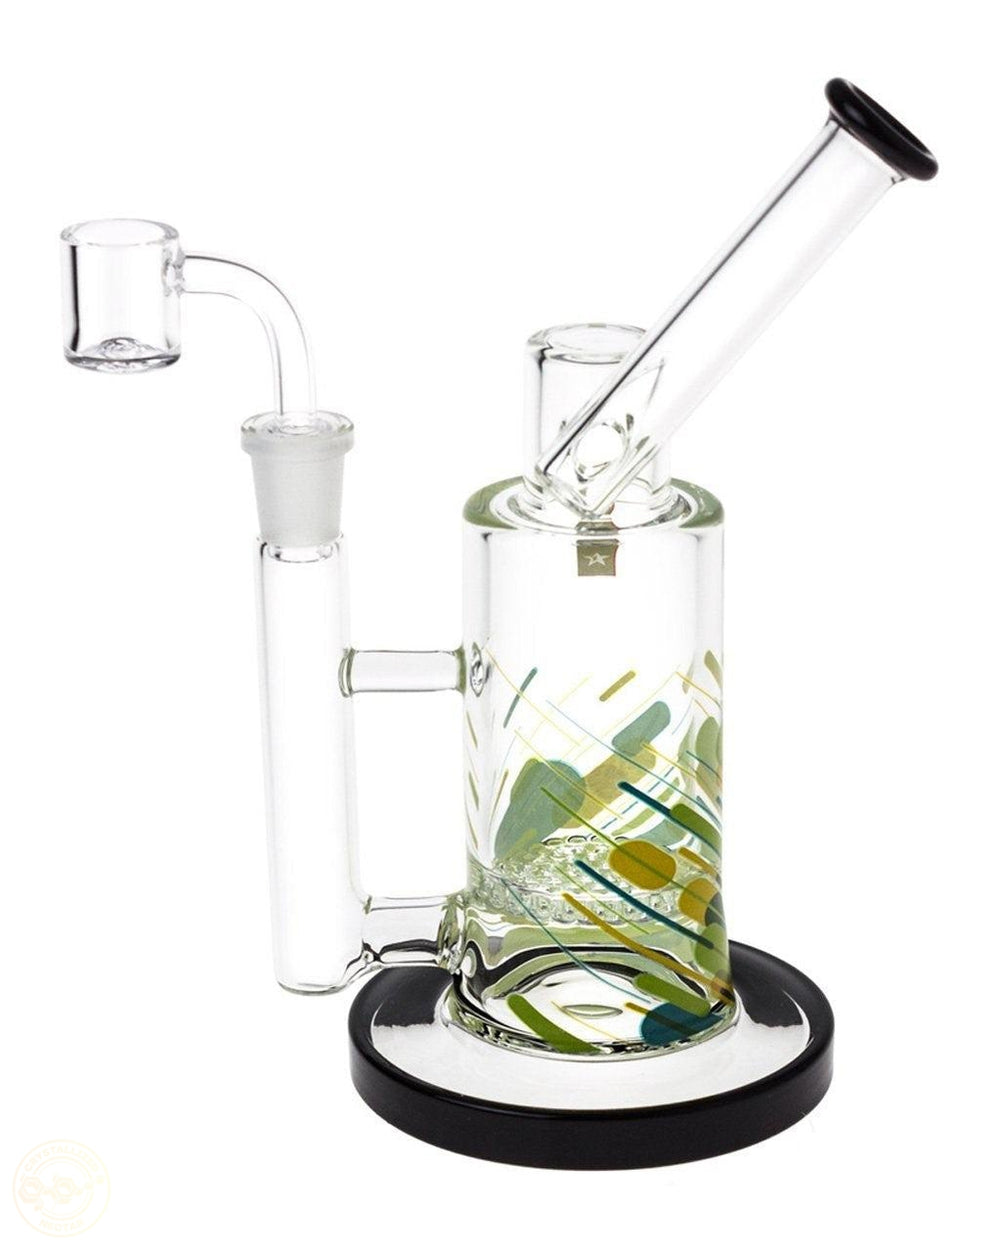 Famous Designs "Versuz" Dab Rig-Crystallized Nectar